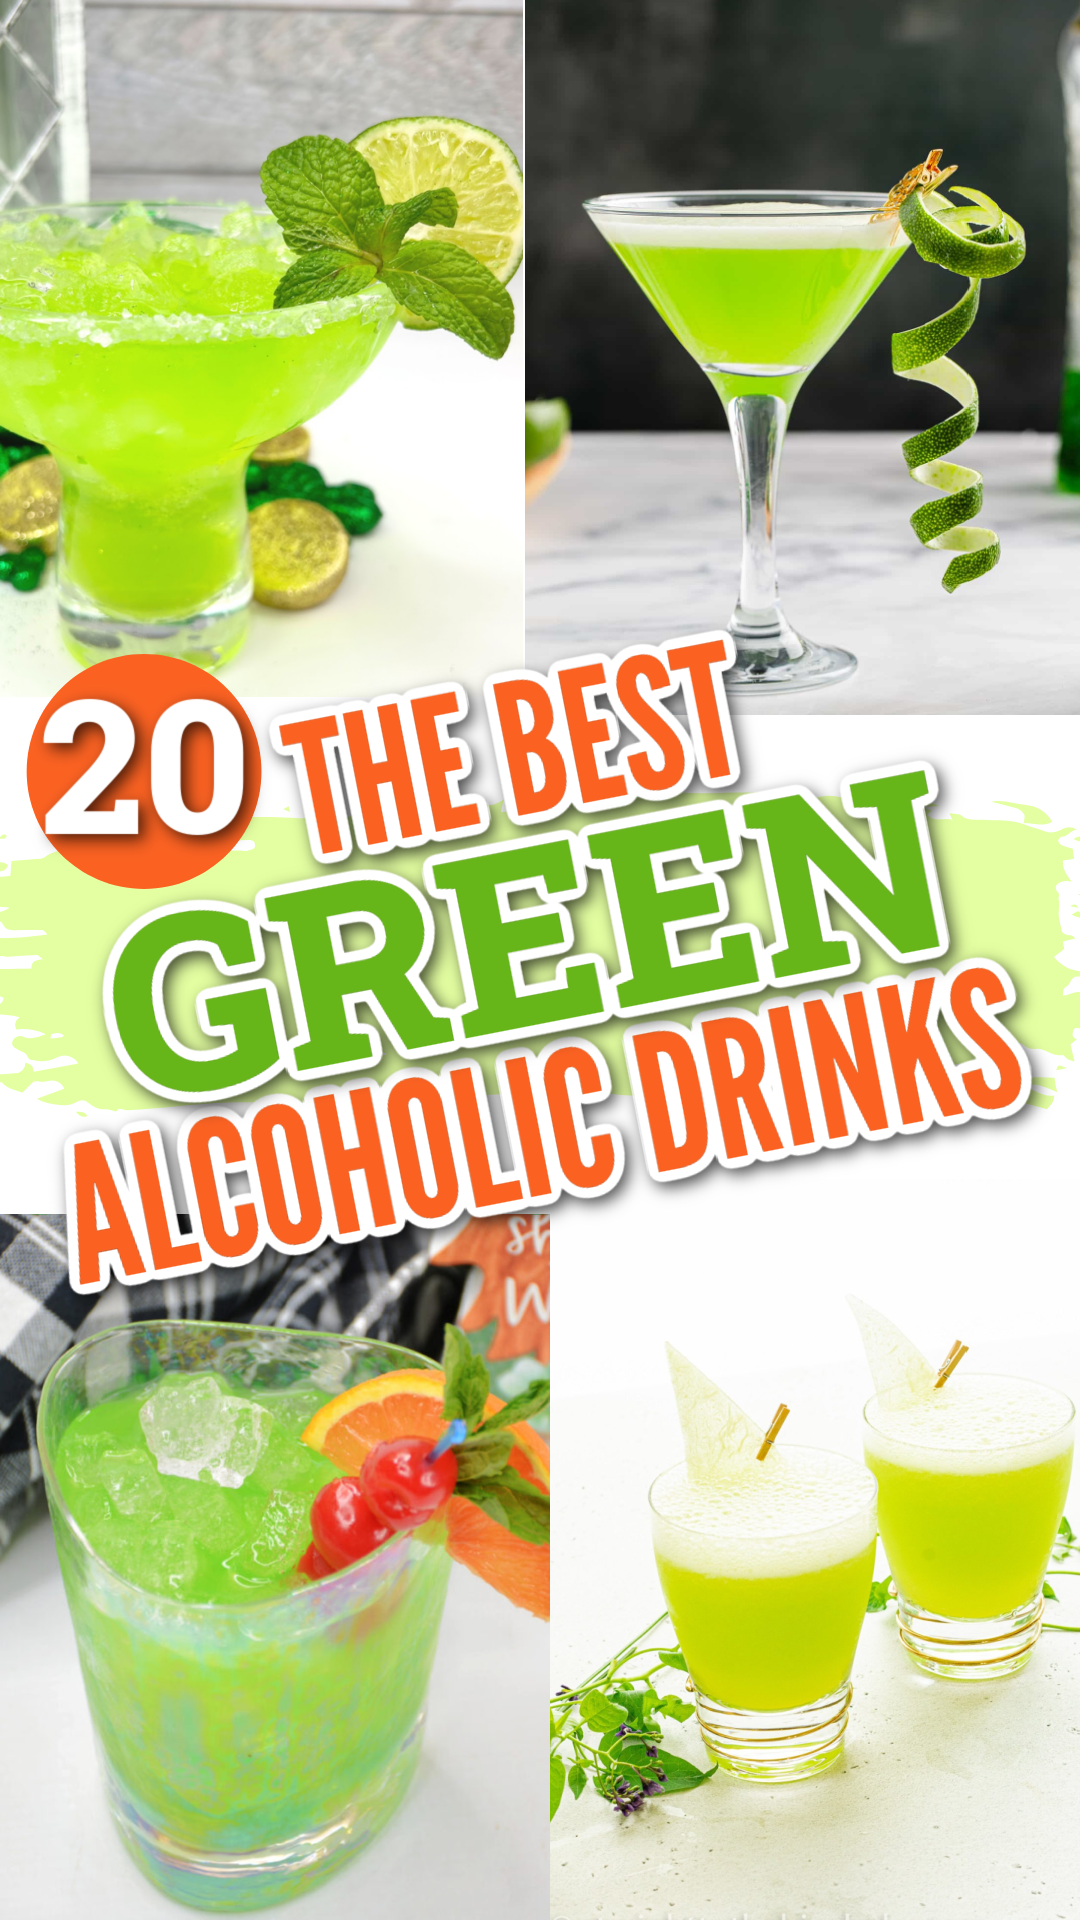 A collage of green alcoholic drinks including kiwi drinks, green martini, mojitos and green margaritas.